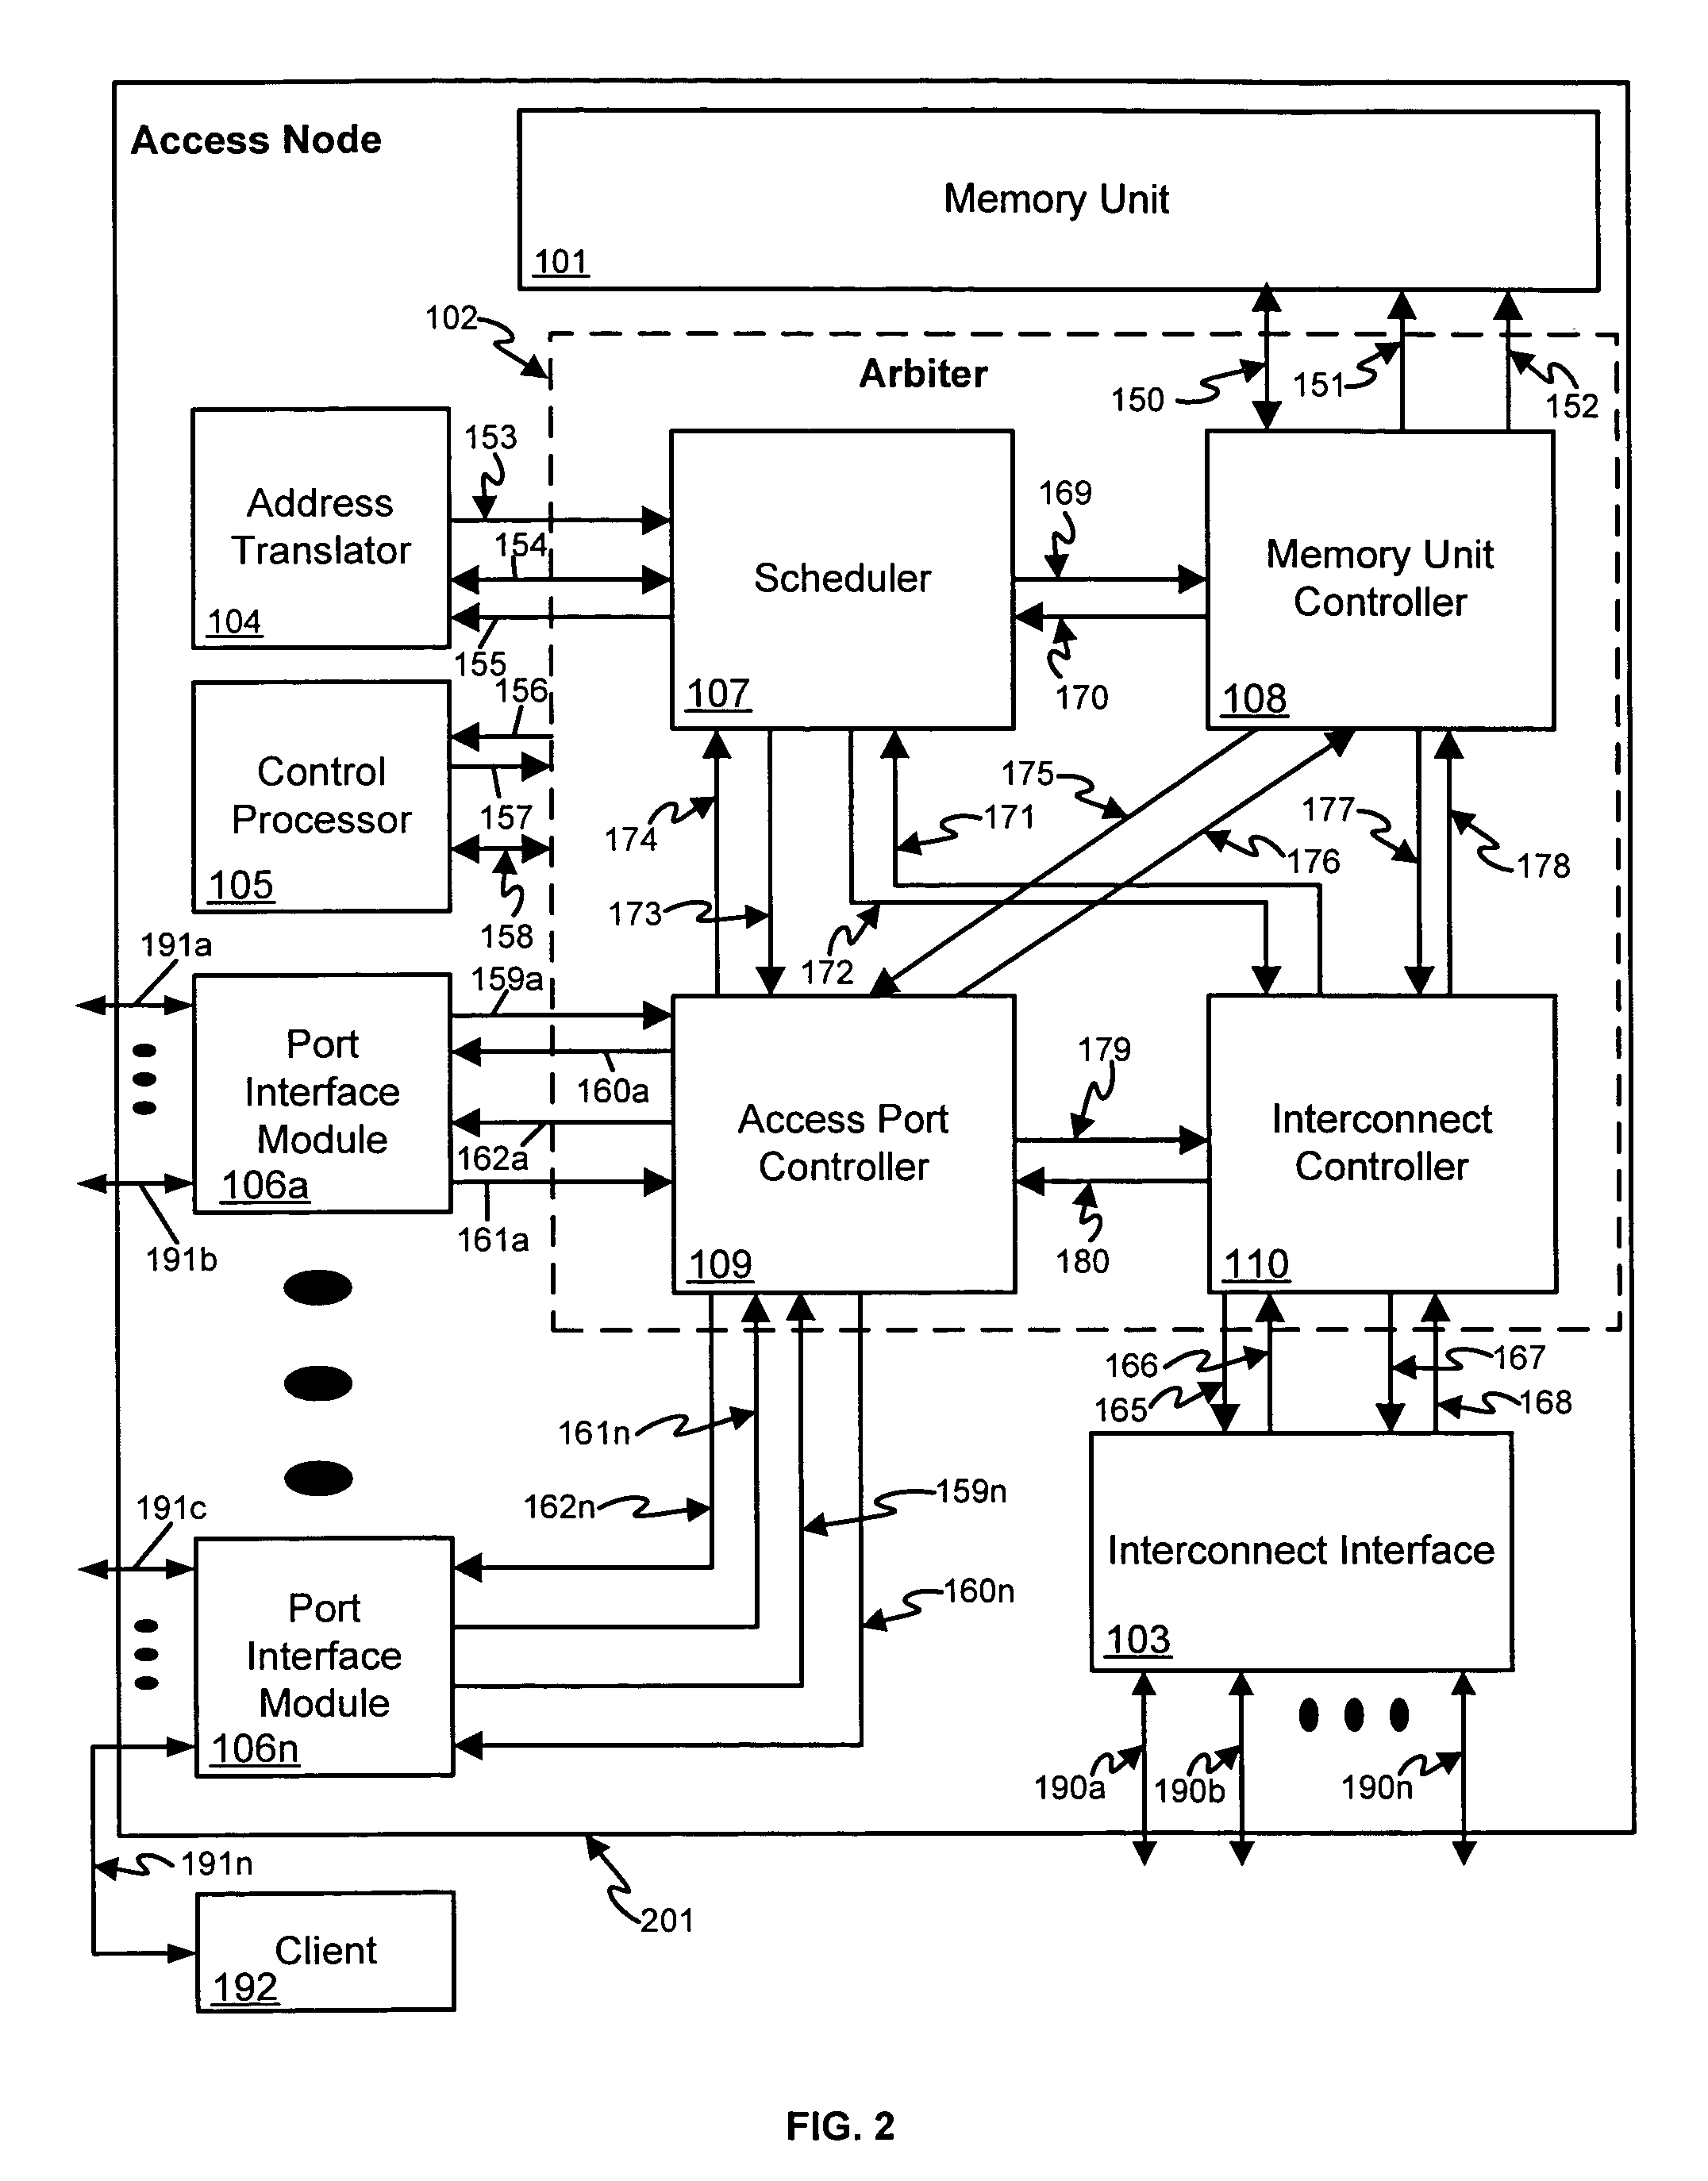 Data access and address translation for retrieval of data amongst multiple interconnected access nodes